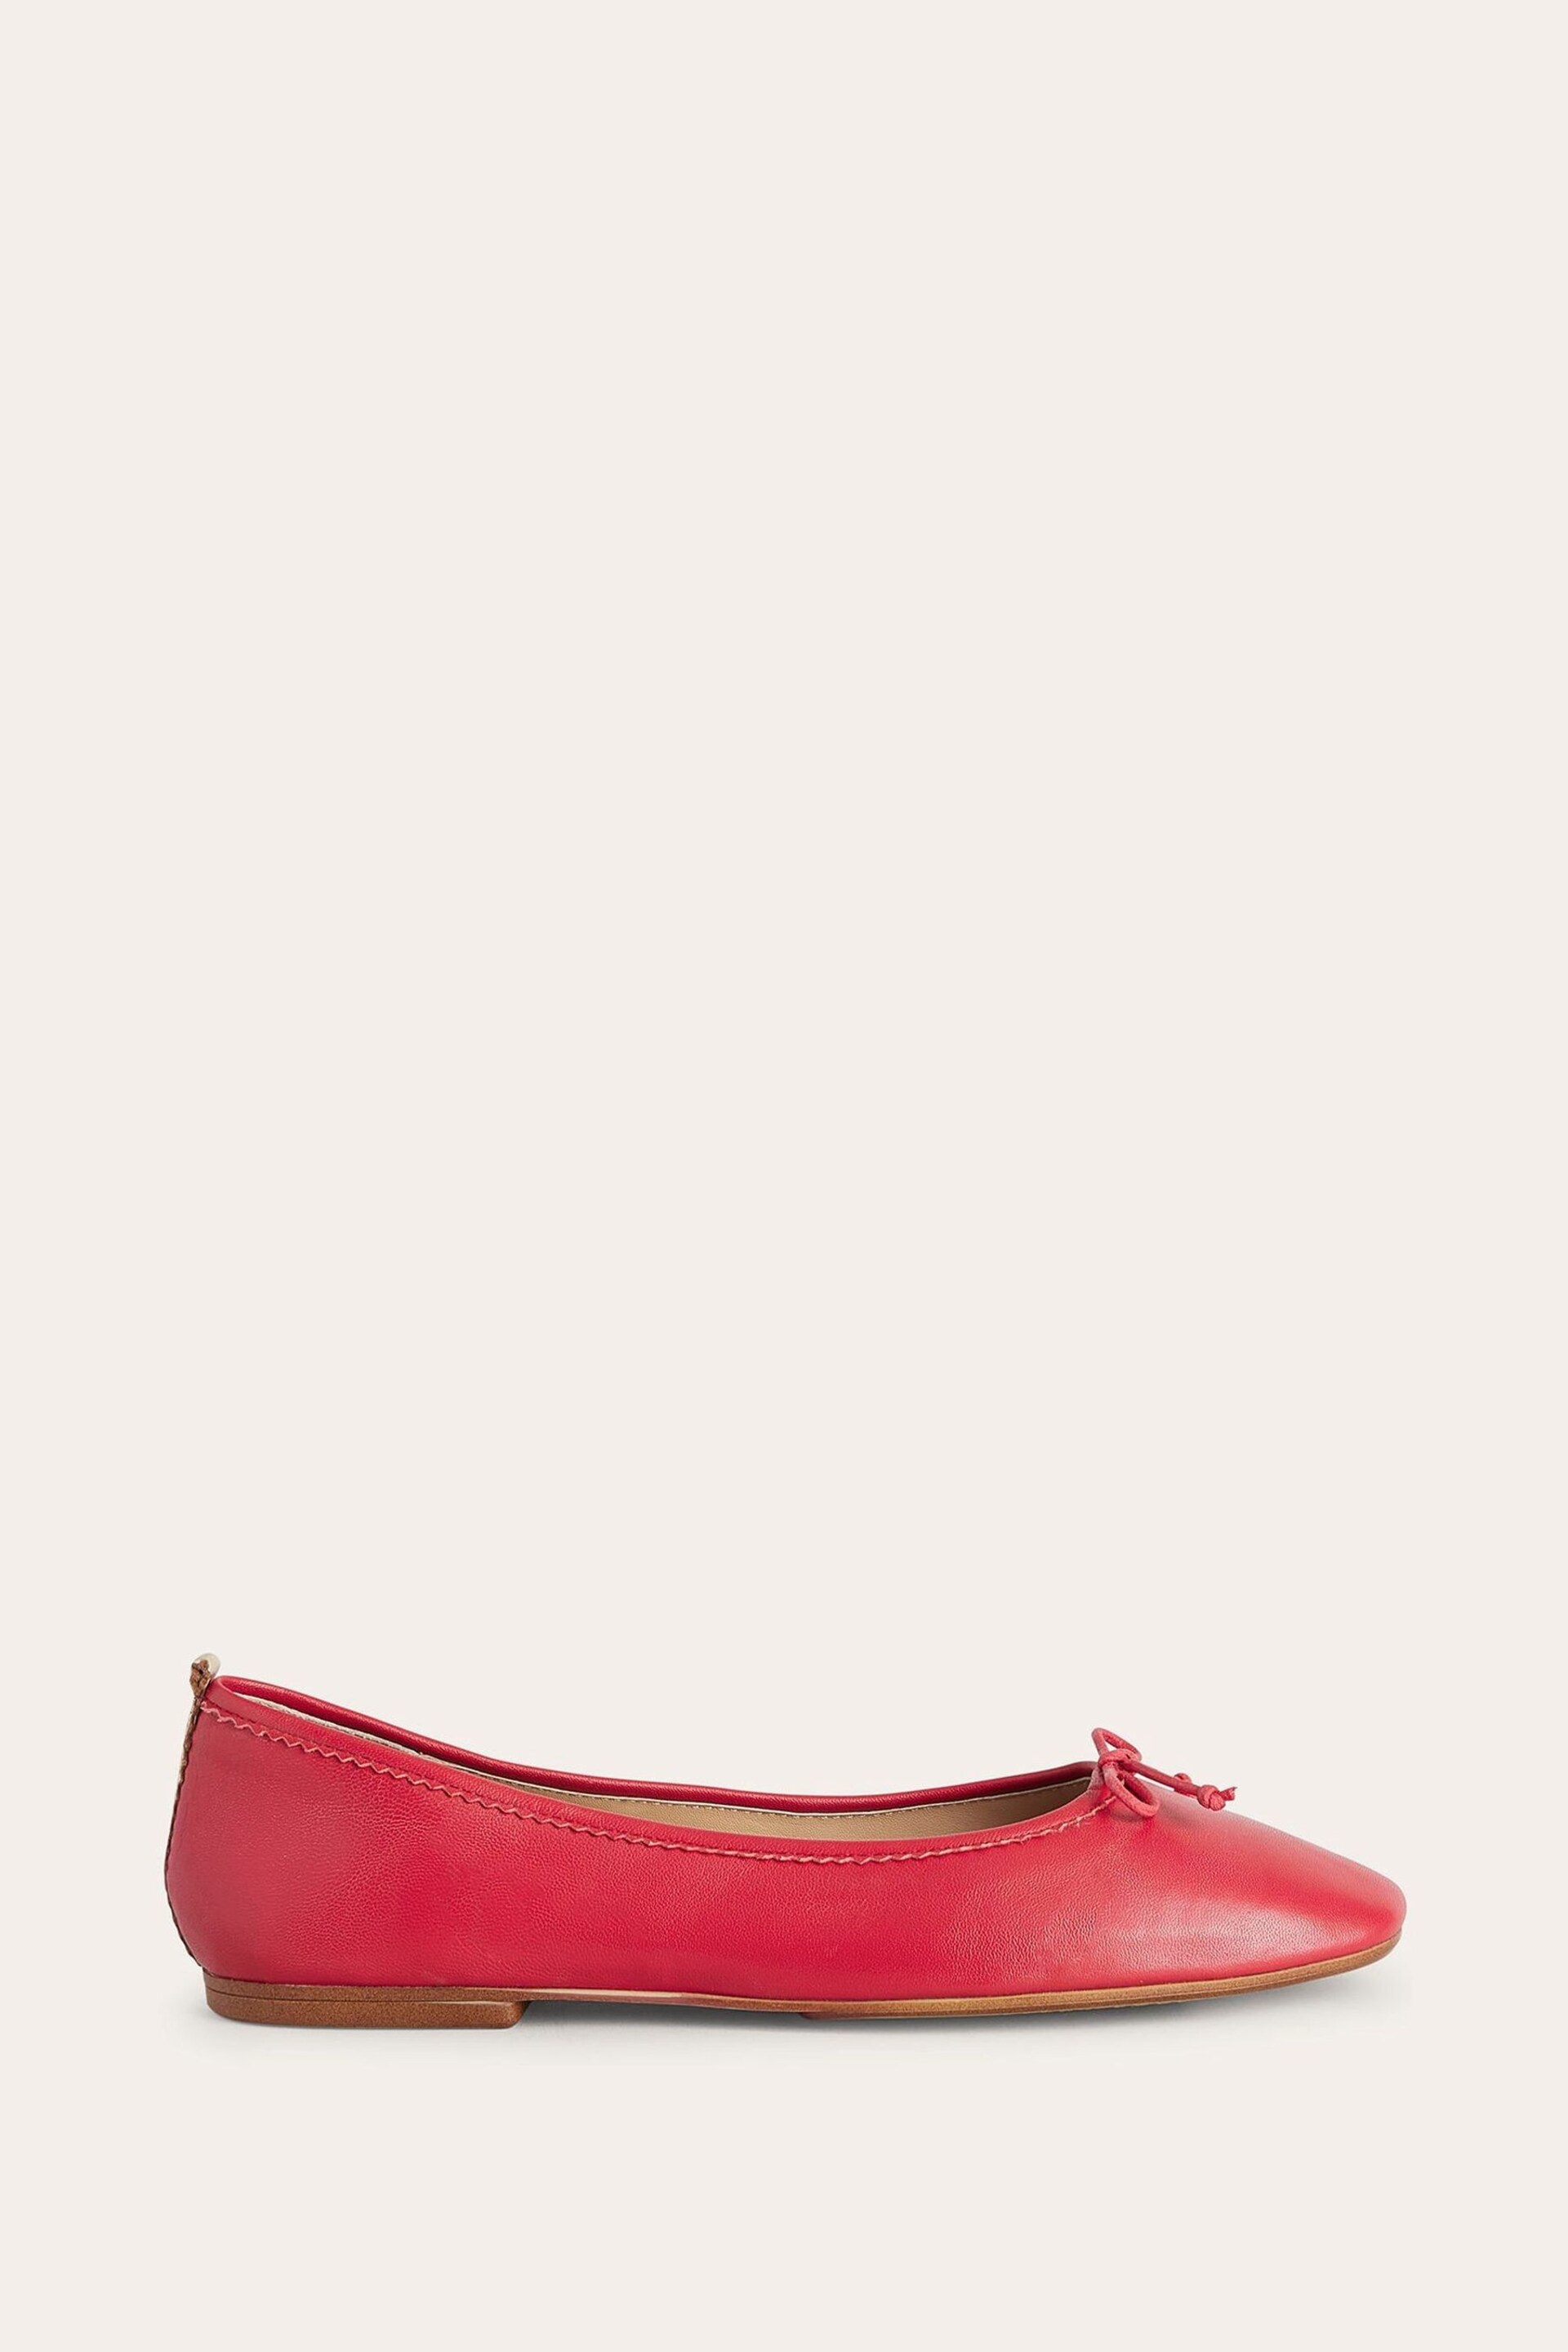 Boden Red Soft Ballet Flats - Image 2 of 4